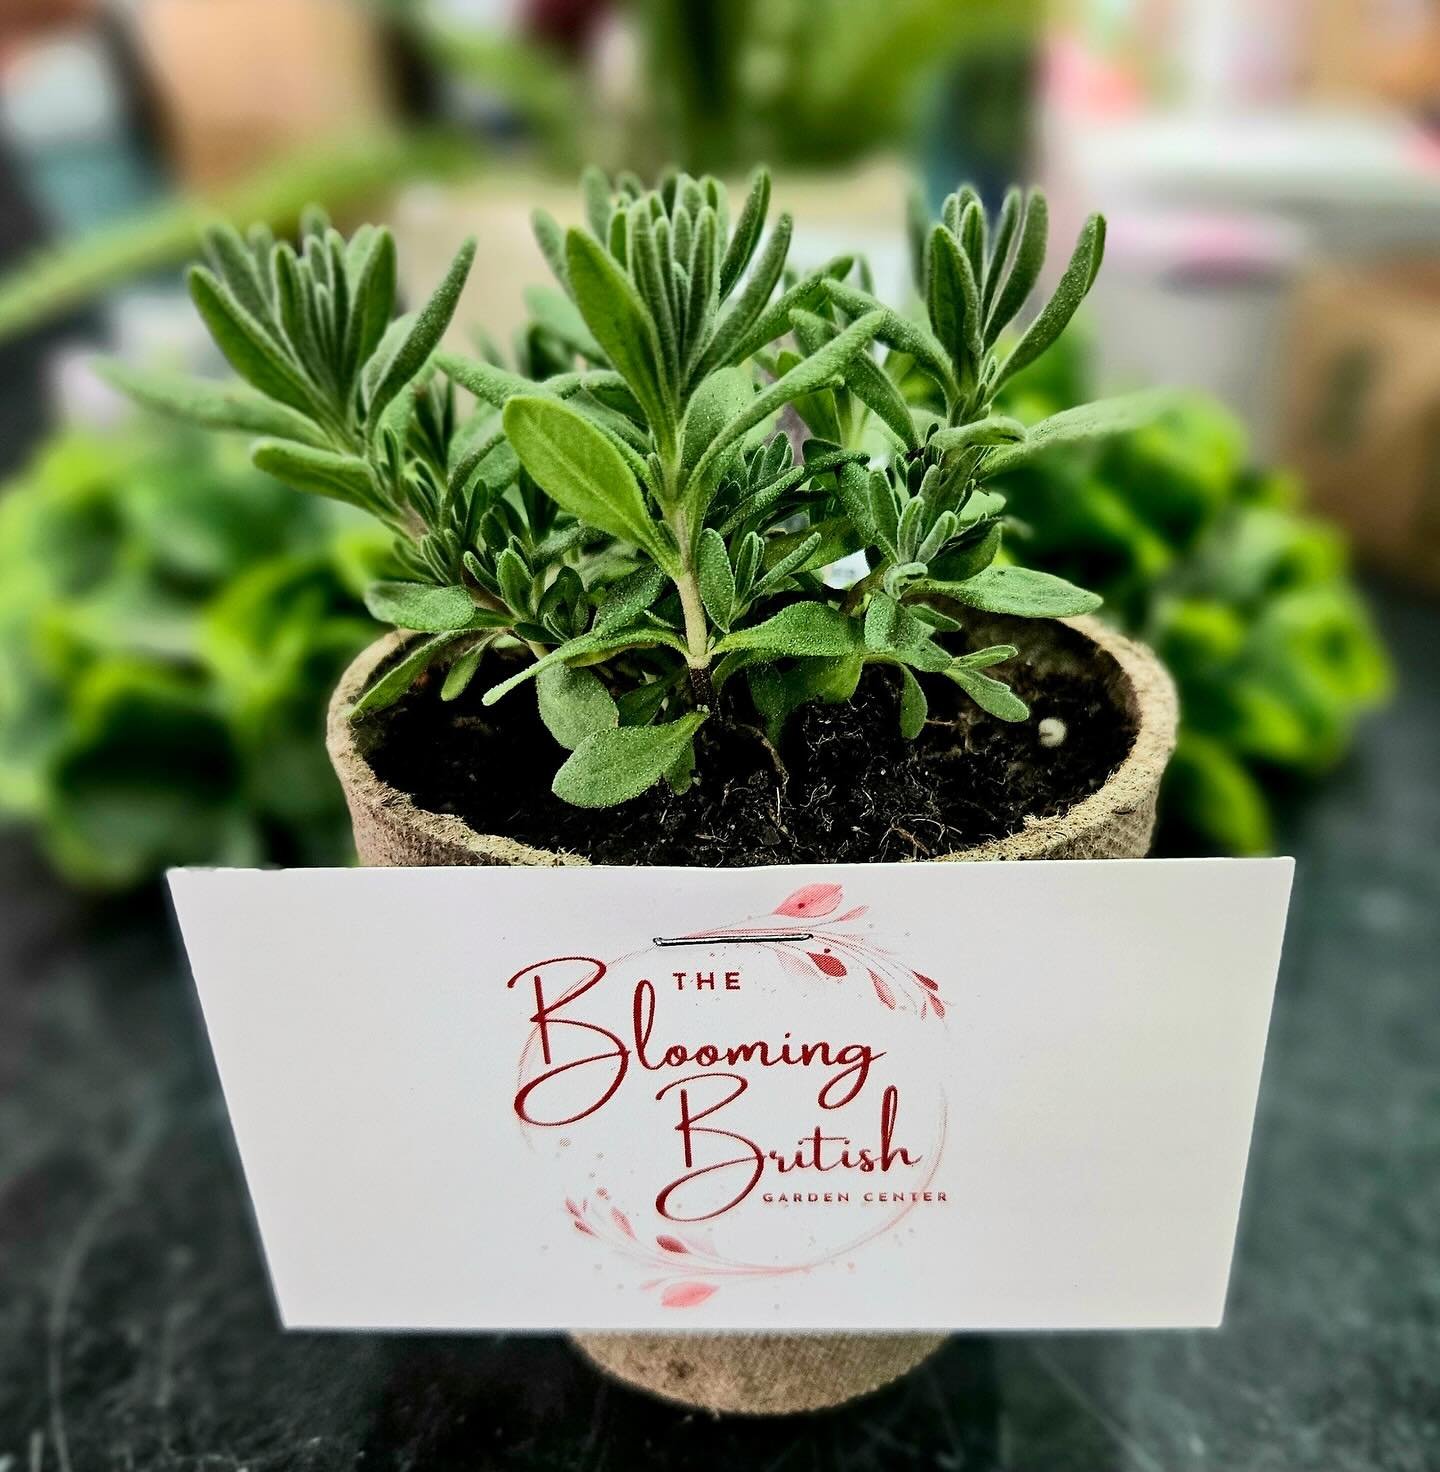 In honor of Earth Day, #DowntownHamptonVA has partnered with Mercury Garden Center, now &lsquo;The Blooming British Garden Center&rsquo; to hand out FREE potted plants to customers! 🌱 

Stop by the week of April 22nd at participating locations while